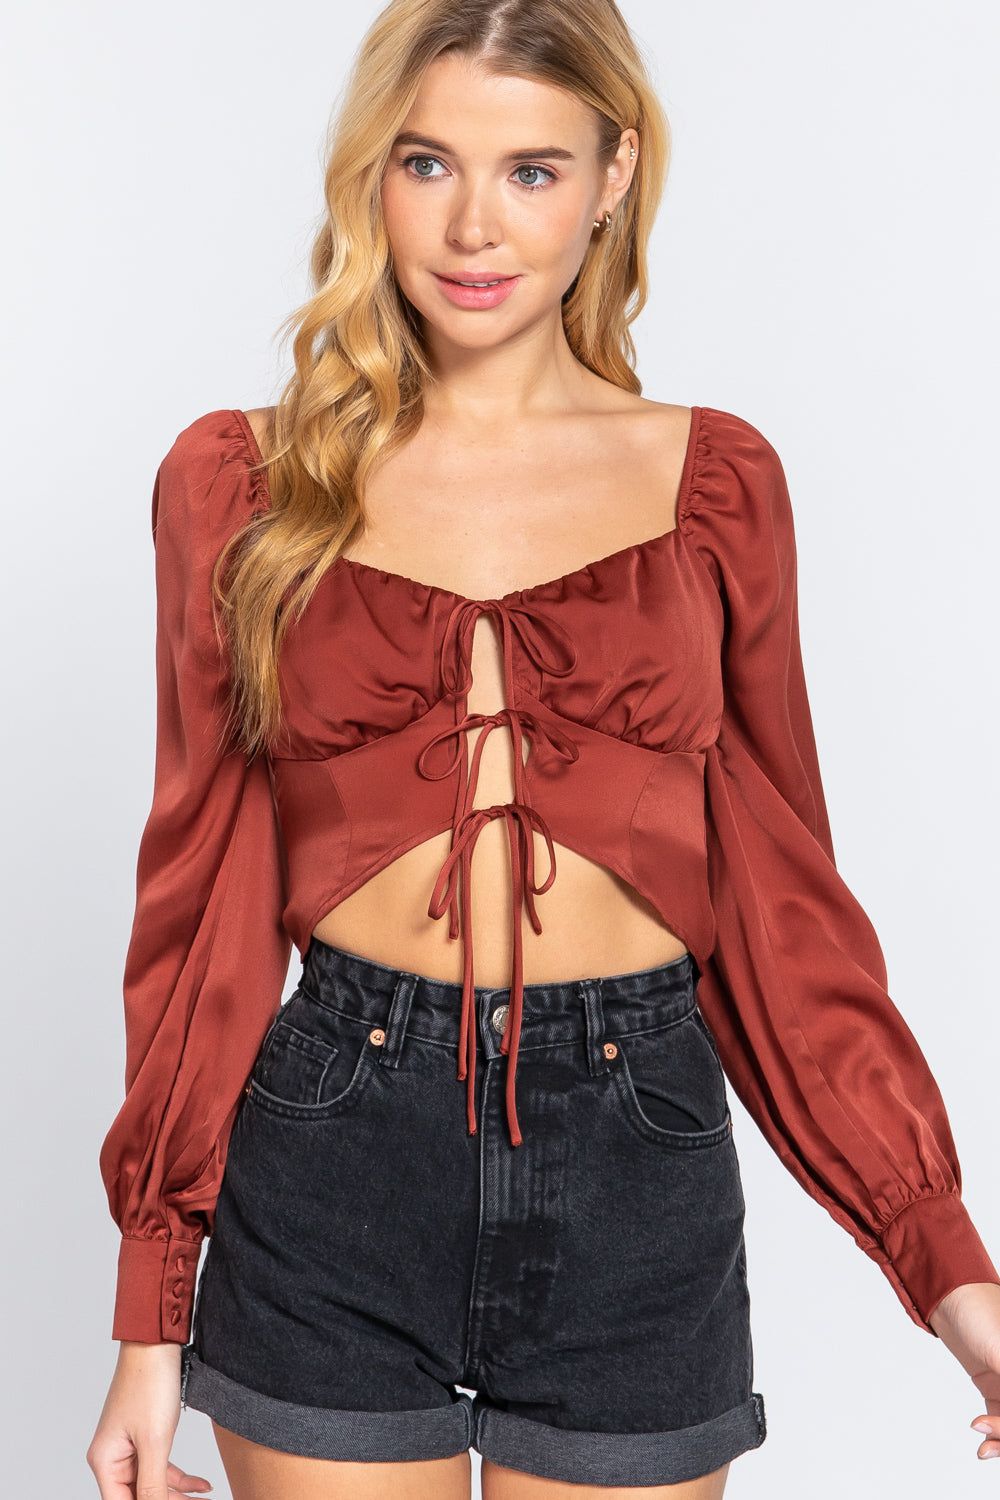 Long Sleeve Sweetheart Neck Front Ribbon Tie Detail Woven Top - us.meeeshop